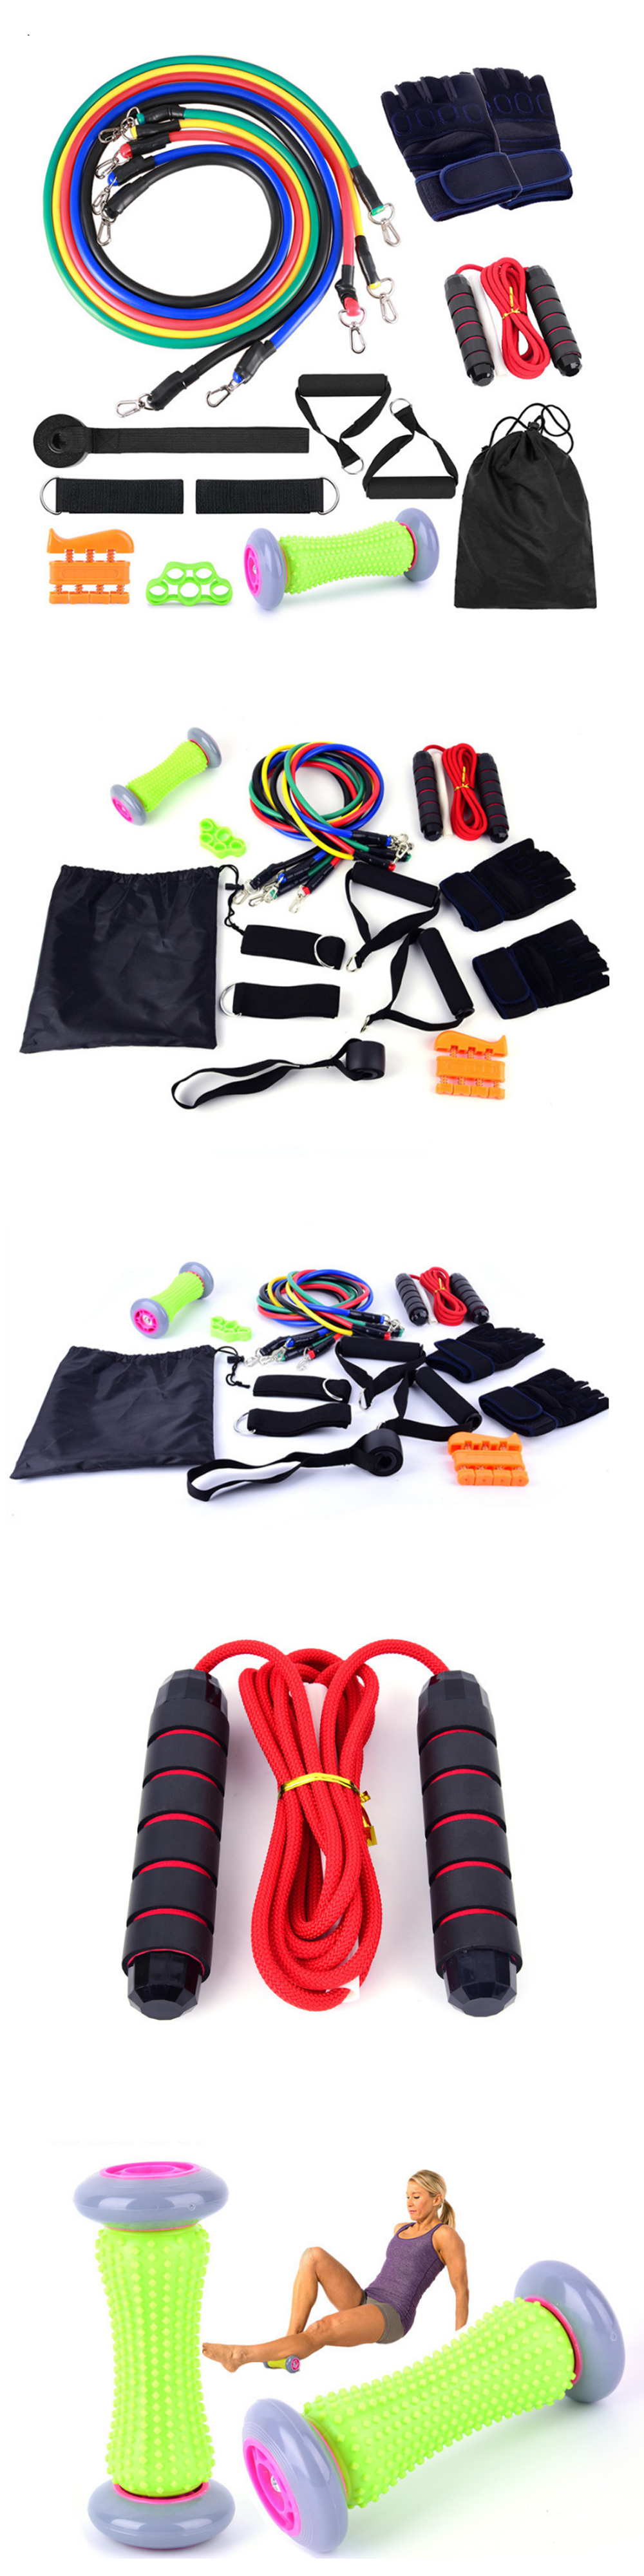 16-Pcs-Resistance-Bands-Set-5-Exercise-Bands-Jump-Rope-Grip-Strength-Hand-Legs-Straps-Gloves-Foot-Ma-1716447-1